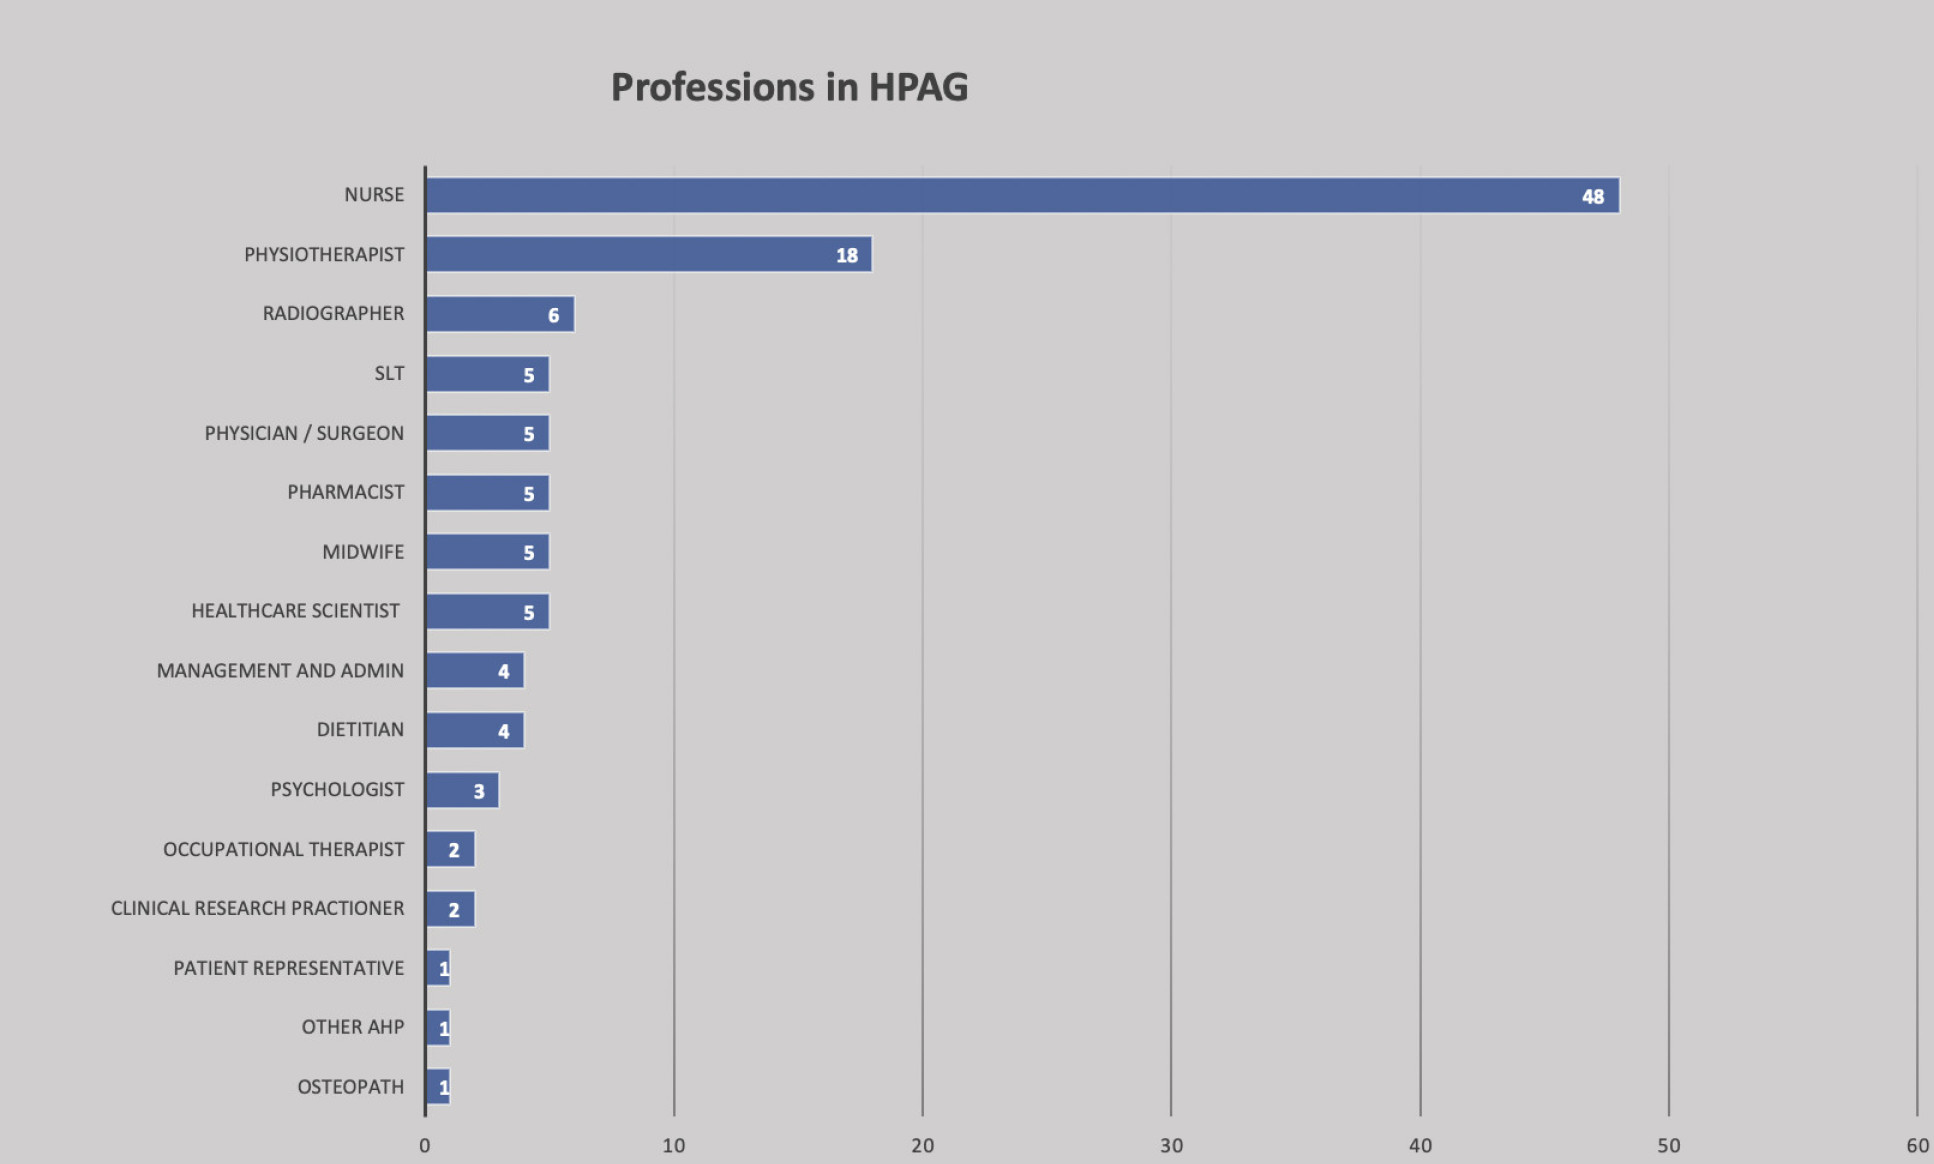 Professions in HPAG